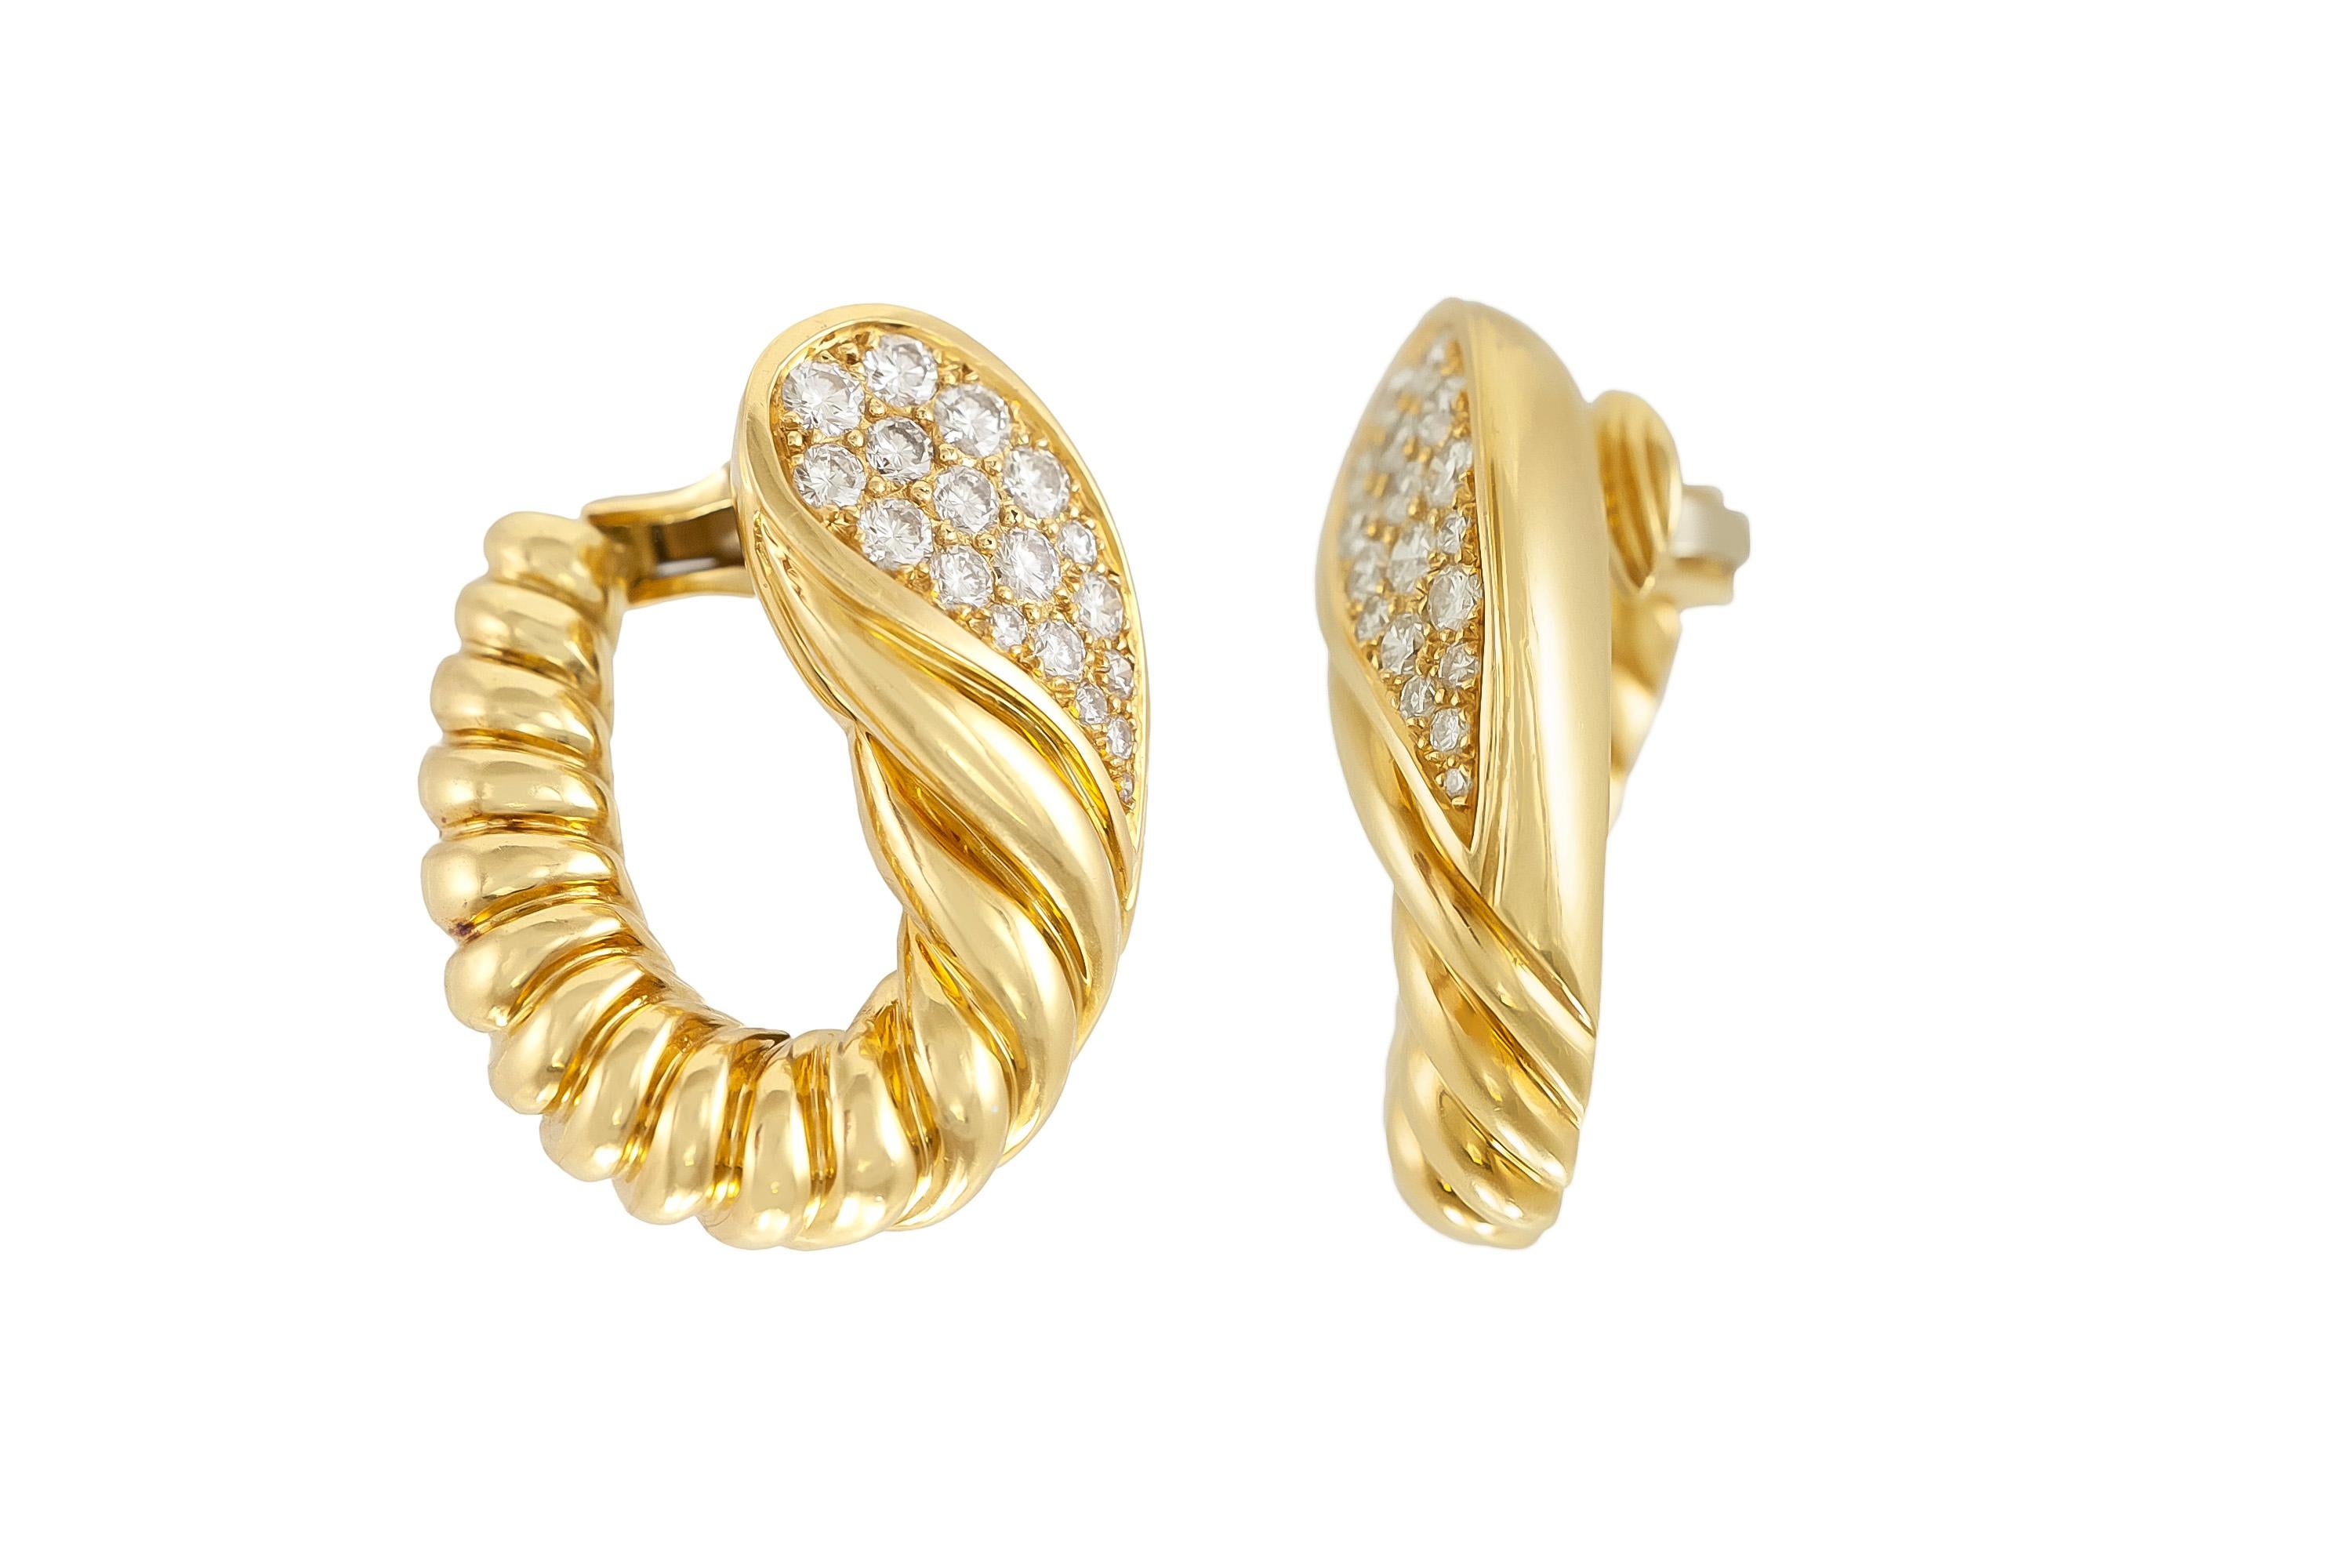 The beautiful Tallarico earrings are finely crafted in 18K yellow gold and diamonds weighing approximately a total of 3.00 carat.
Circa 1970.
Signed by Tallarico.